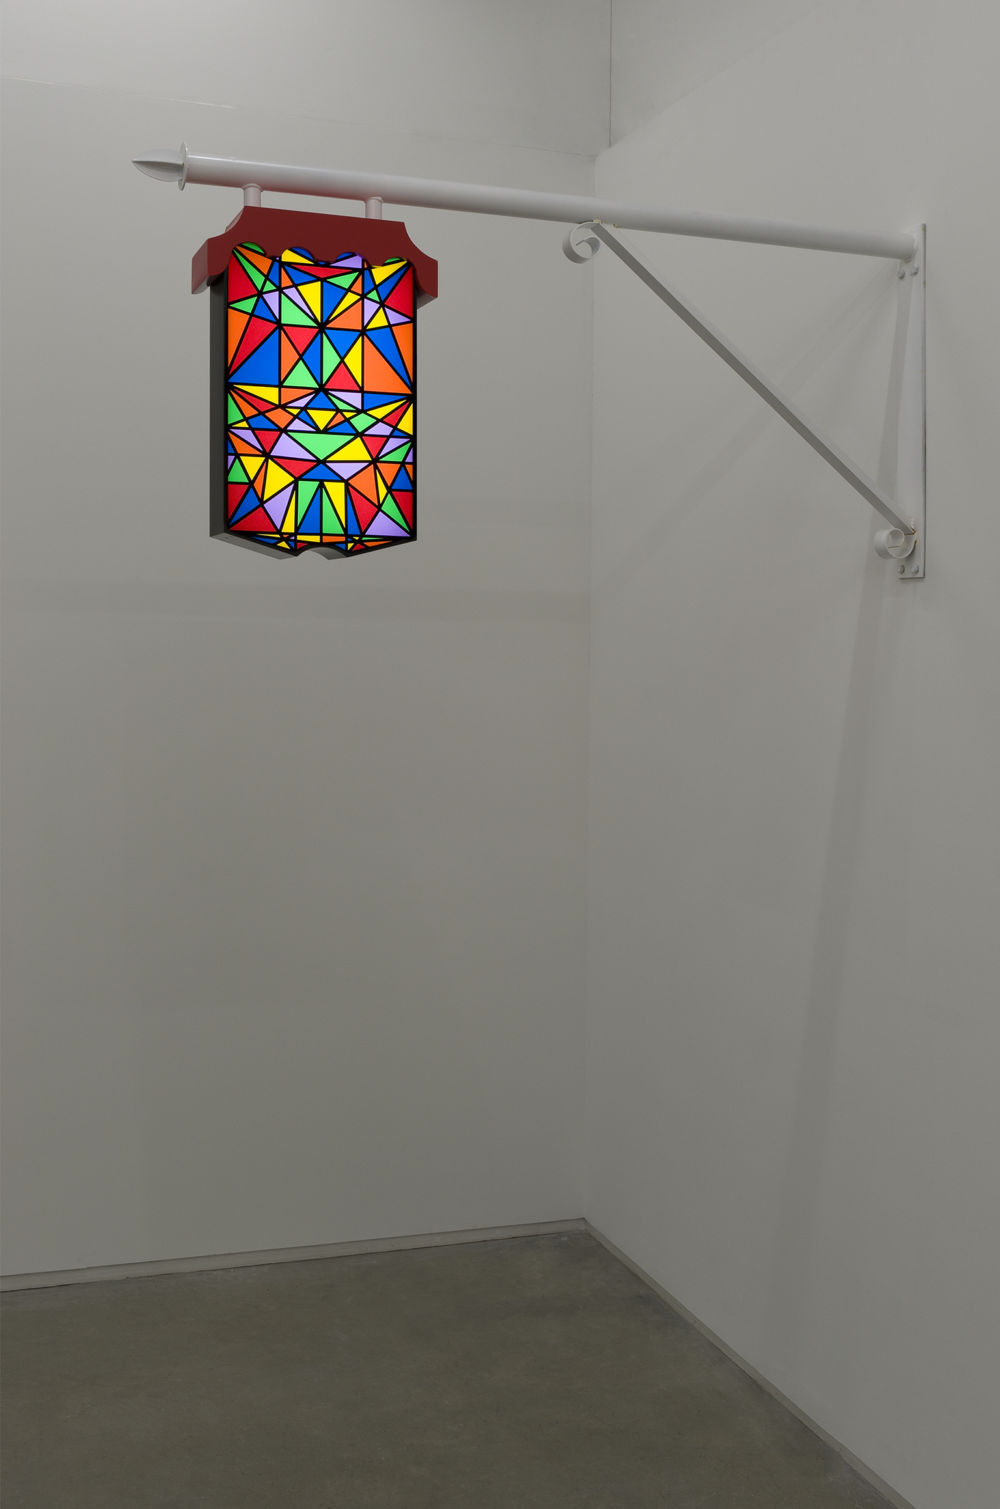 Alex Morrison, A Light in Town, 2010, metal, perspex and LED lighting system, 61 x 6 x 69 in. (155 x 15 x 174 cm) by 